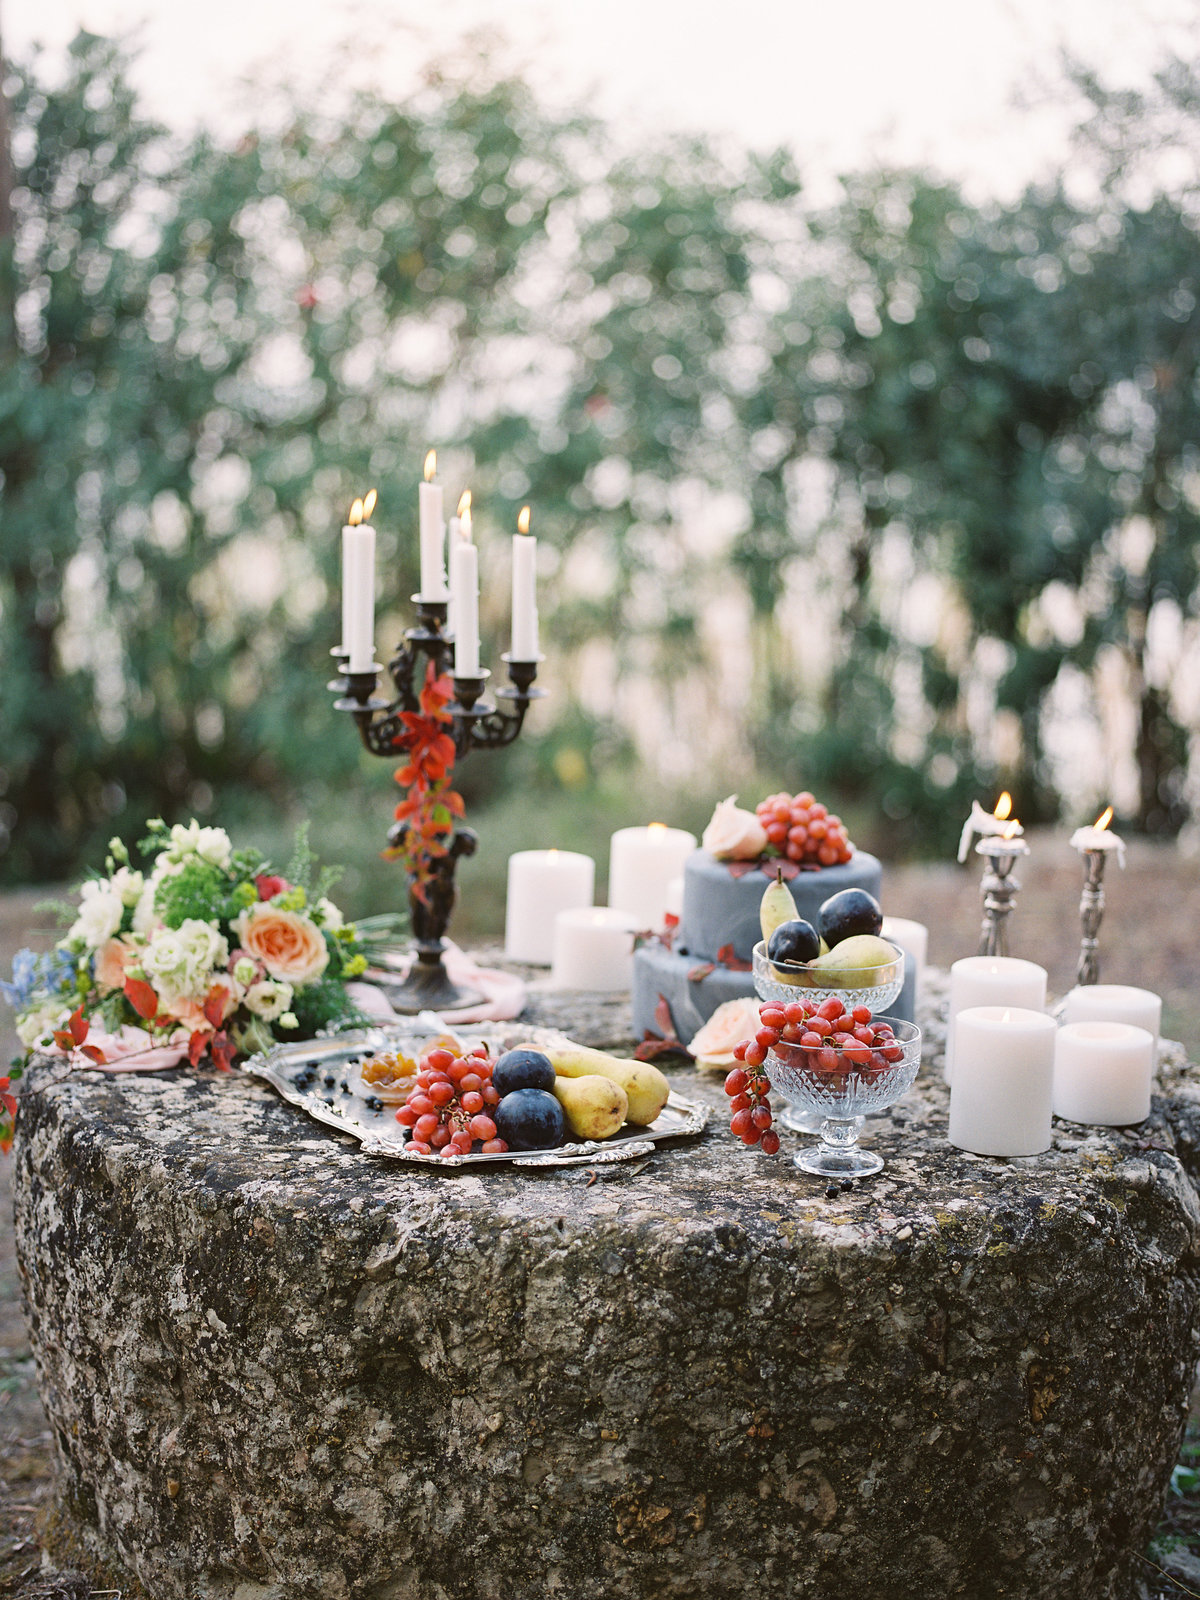 fine art wedding photography in corfu by Kostis Mouselimis on film_041